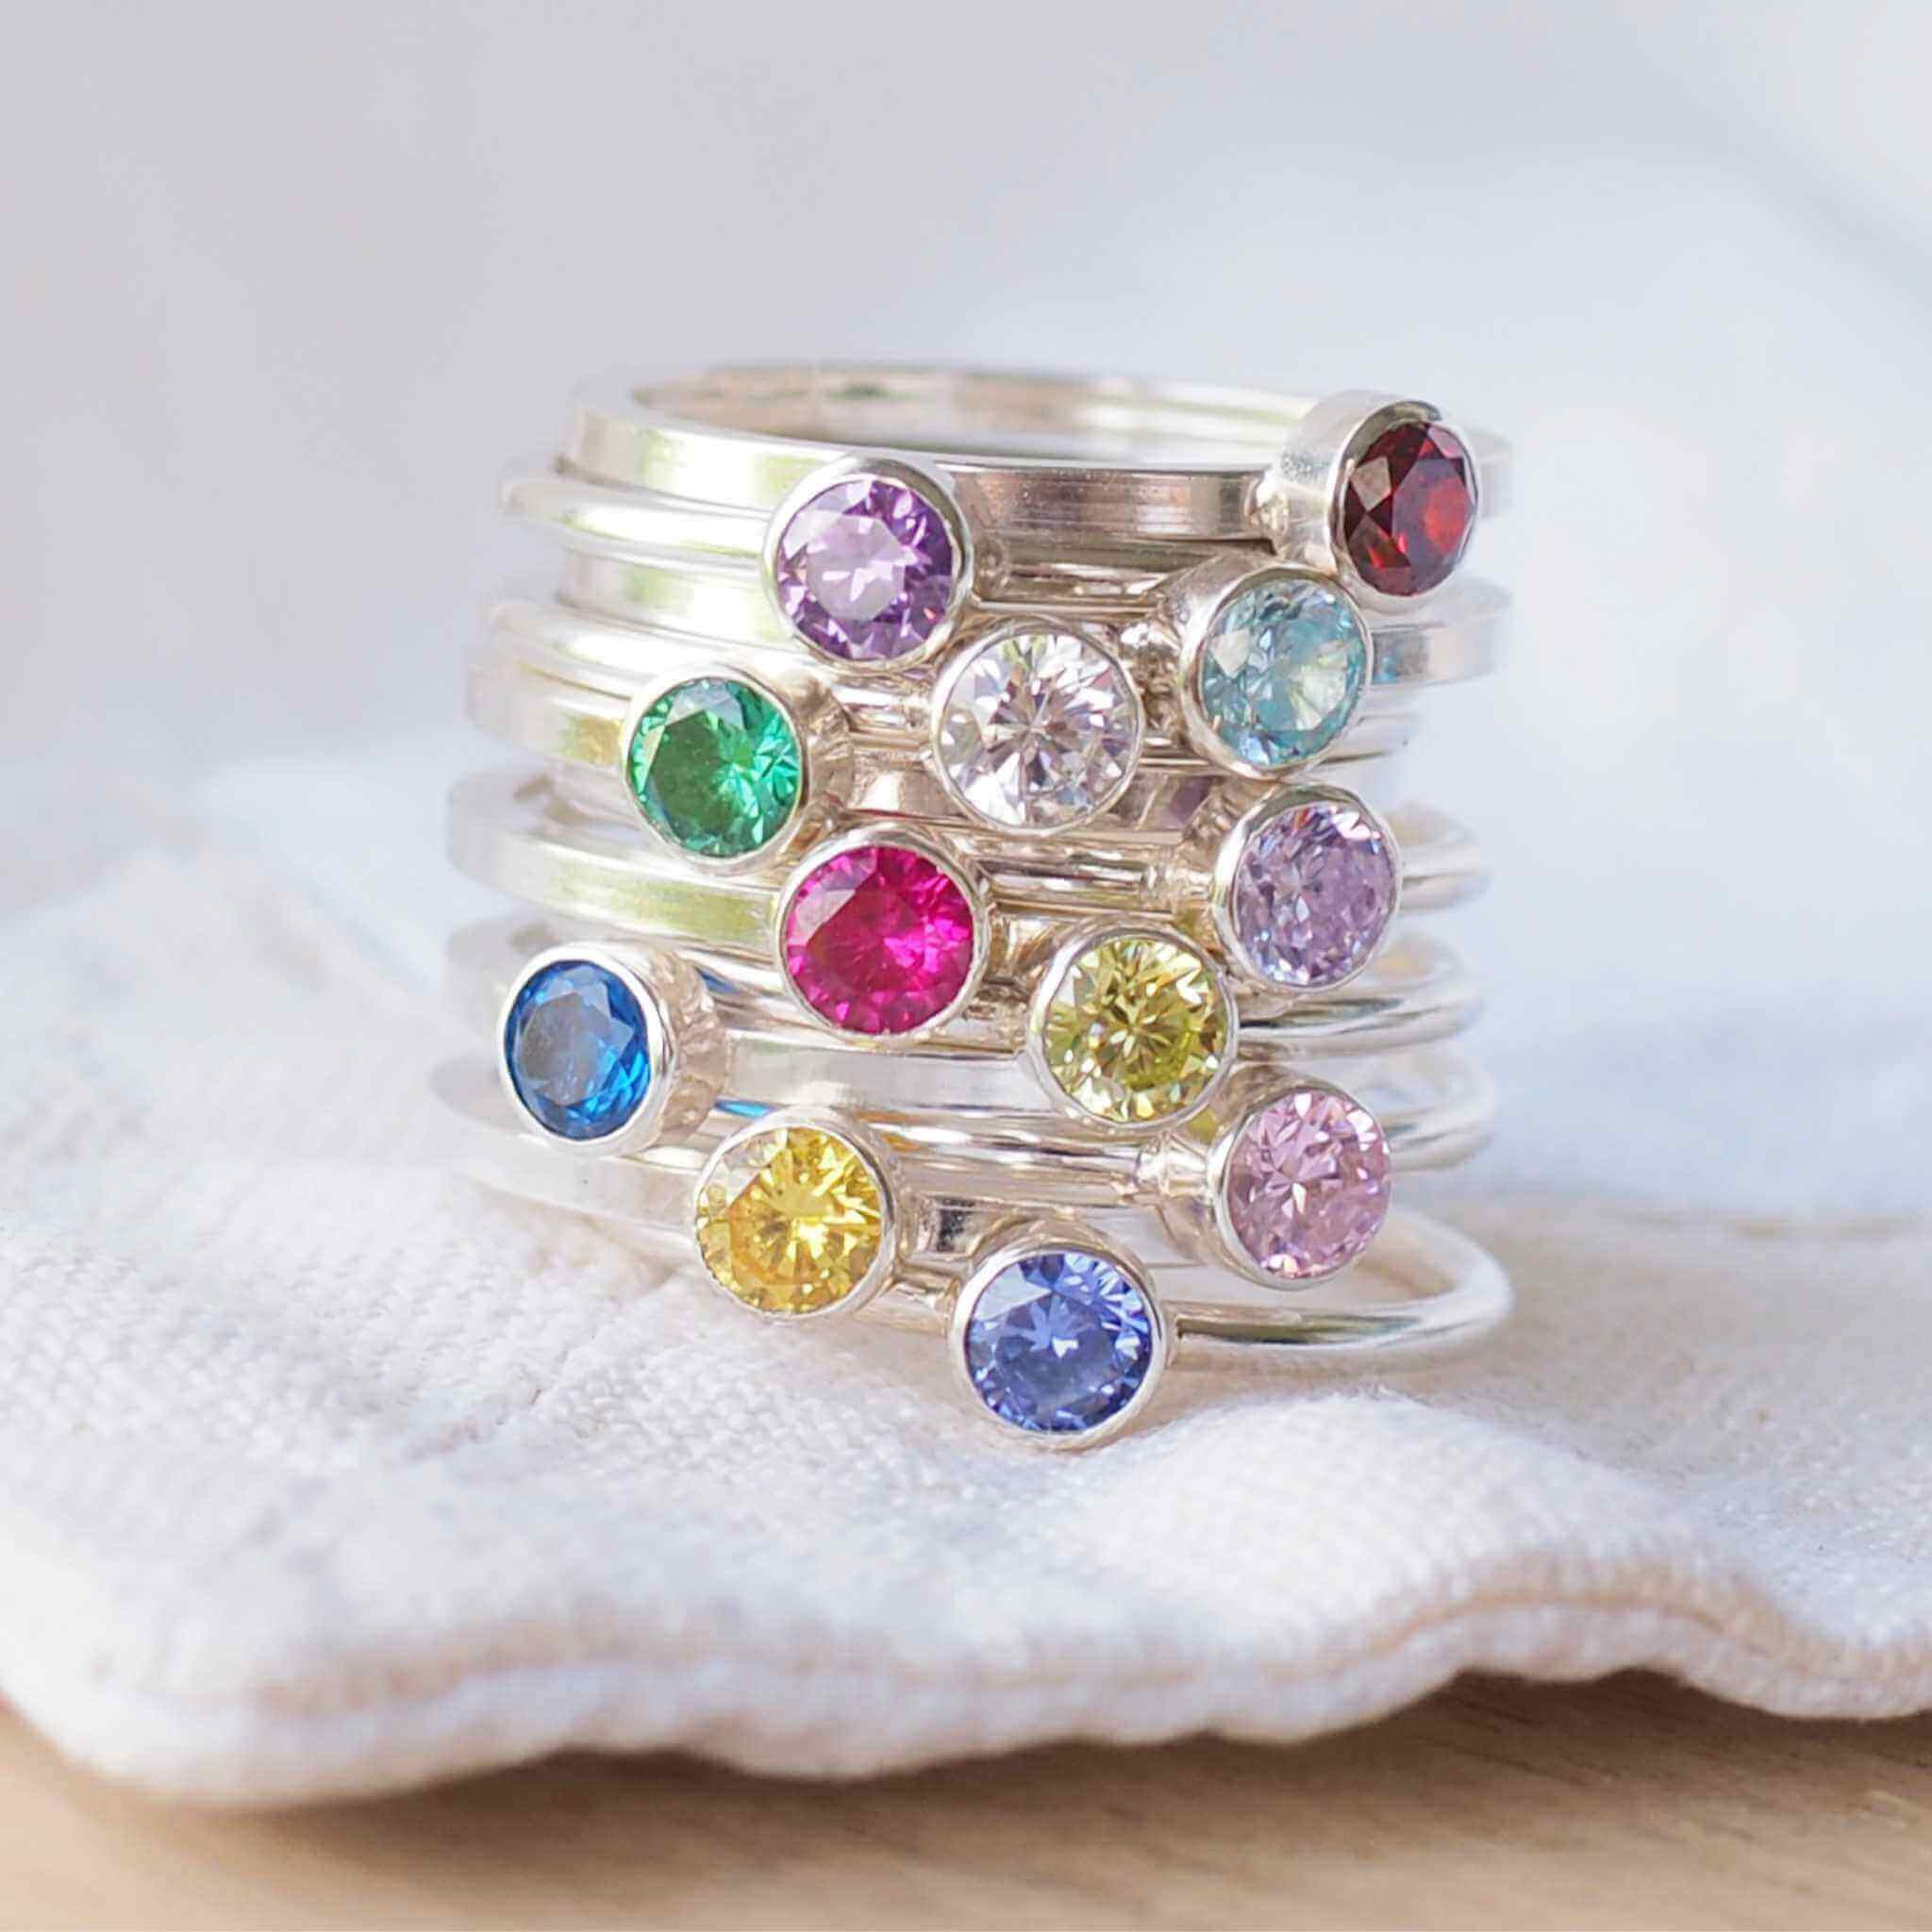 Josephs Jewelers - Stackable birthstone rings for Mom? Yes, please! 😉  Featured (Top to Bottom): CSRBT00653 | CSRTP00380 | CSRGA00885 | Facebook